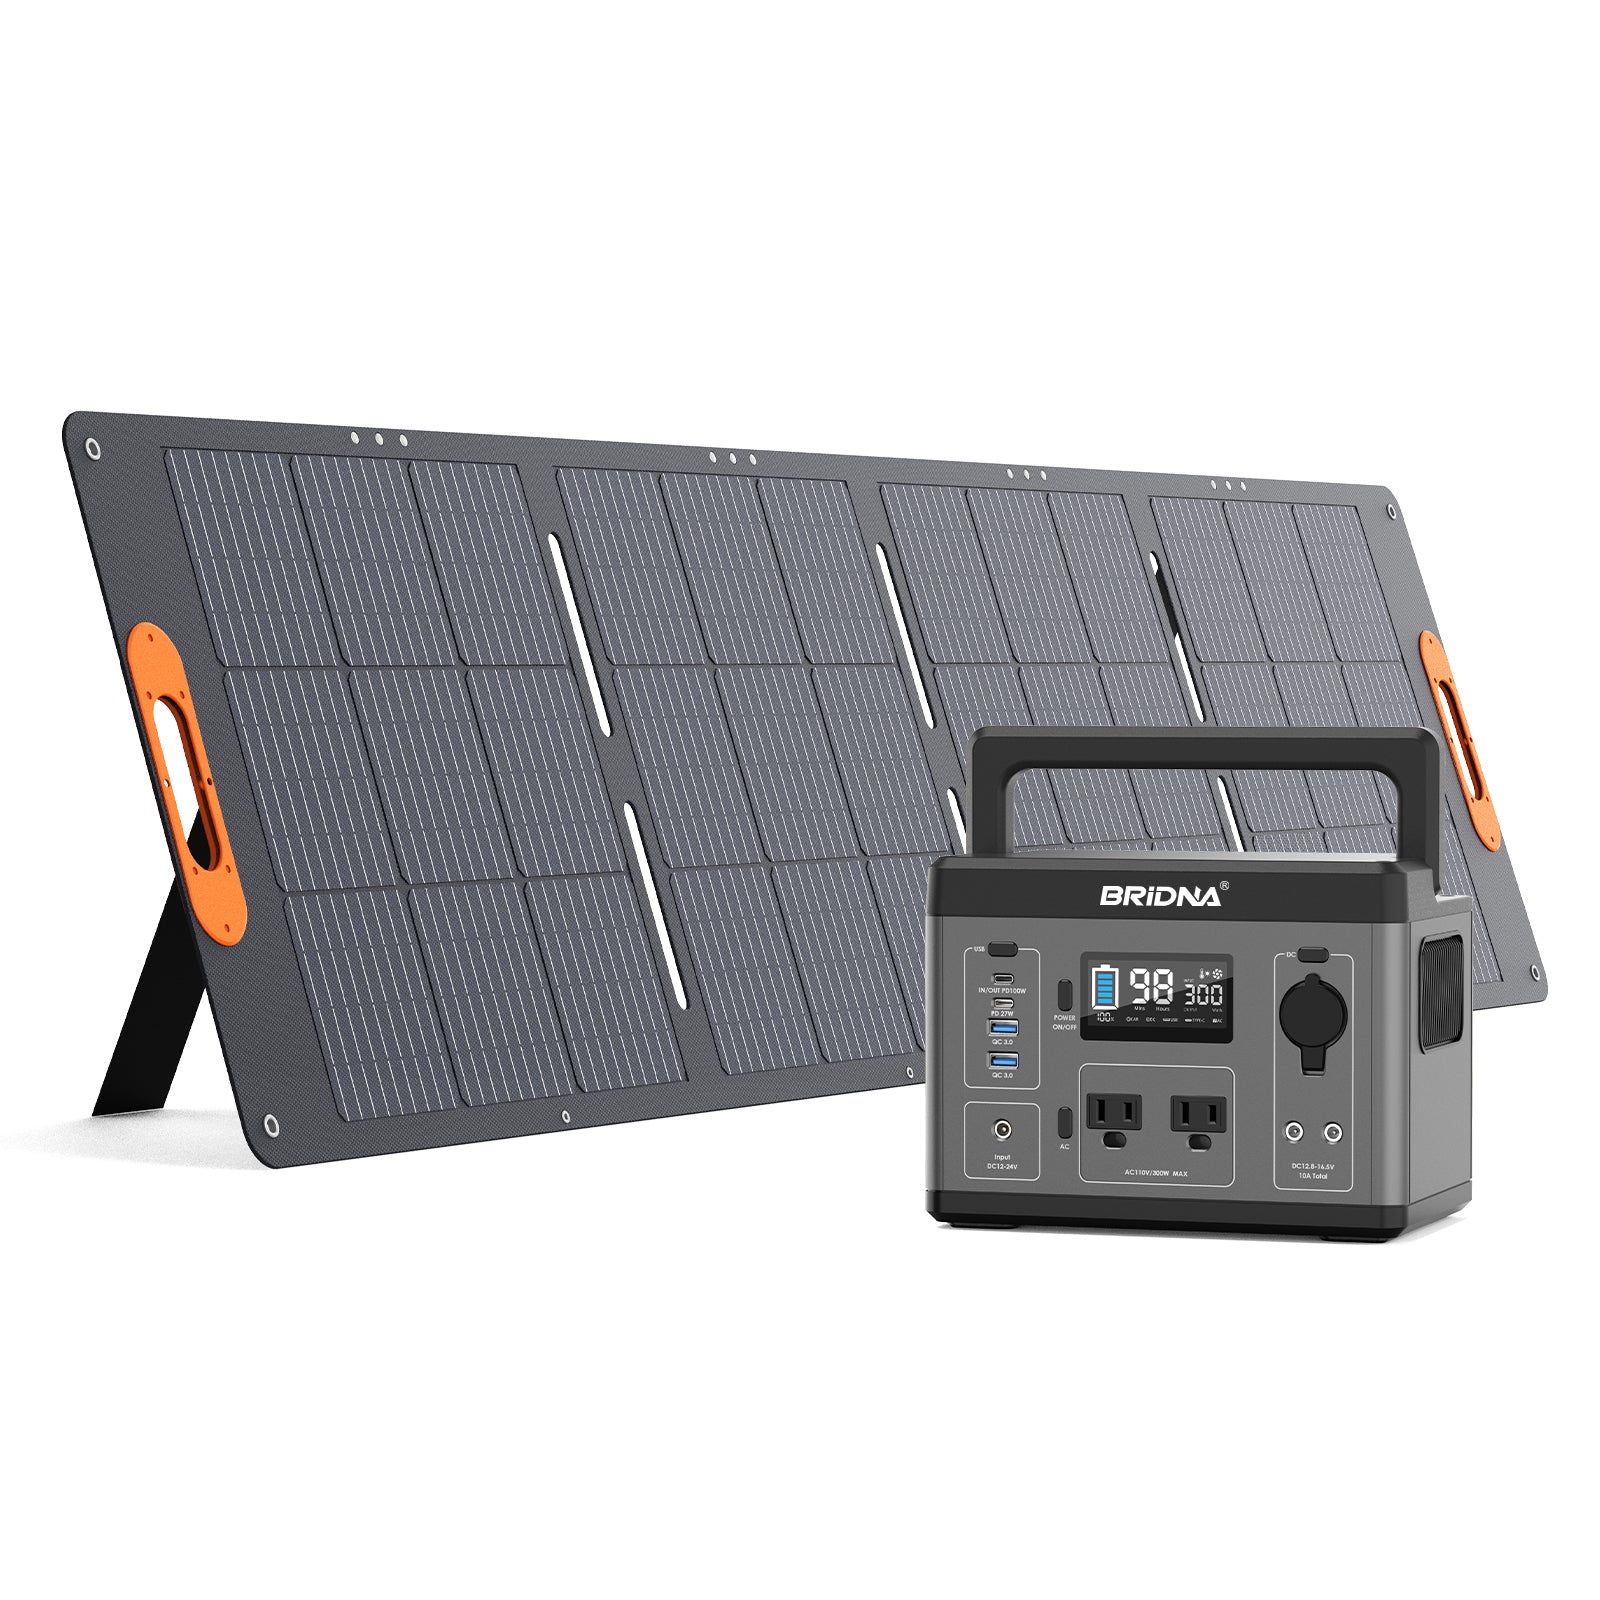 BRIDNA SP120 120W Solar Charging Panel with PPS300-3 Pro 300W Portable Power Station